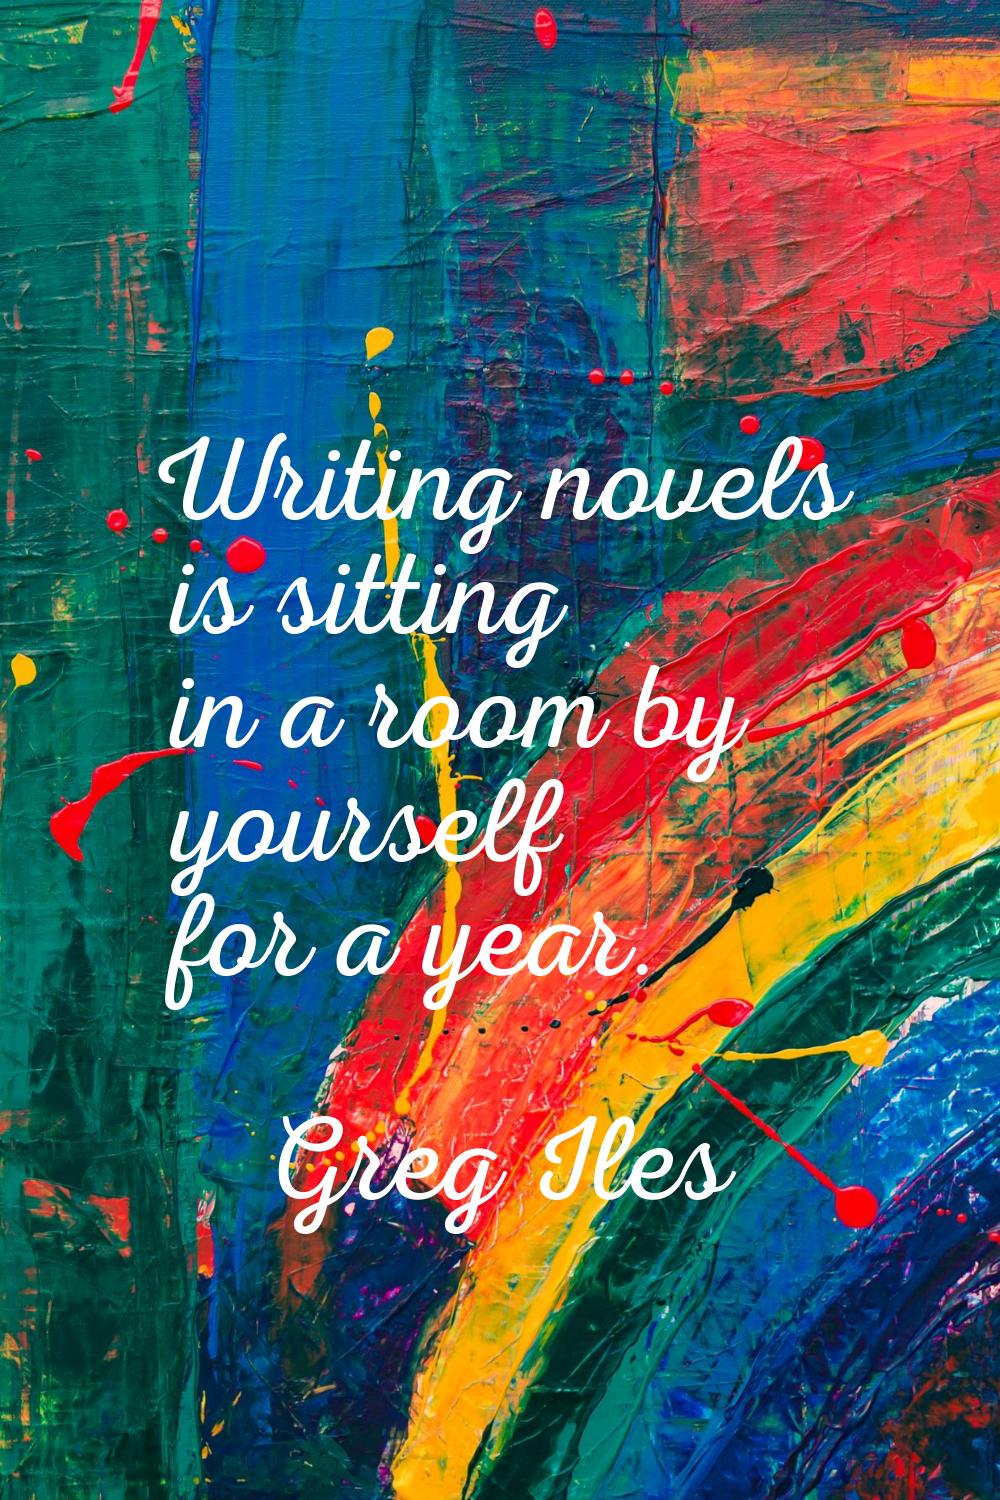 Writing novels is sitting in a room by yourself for a year.